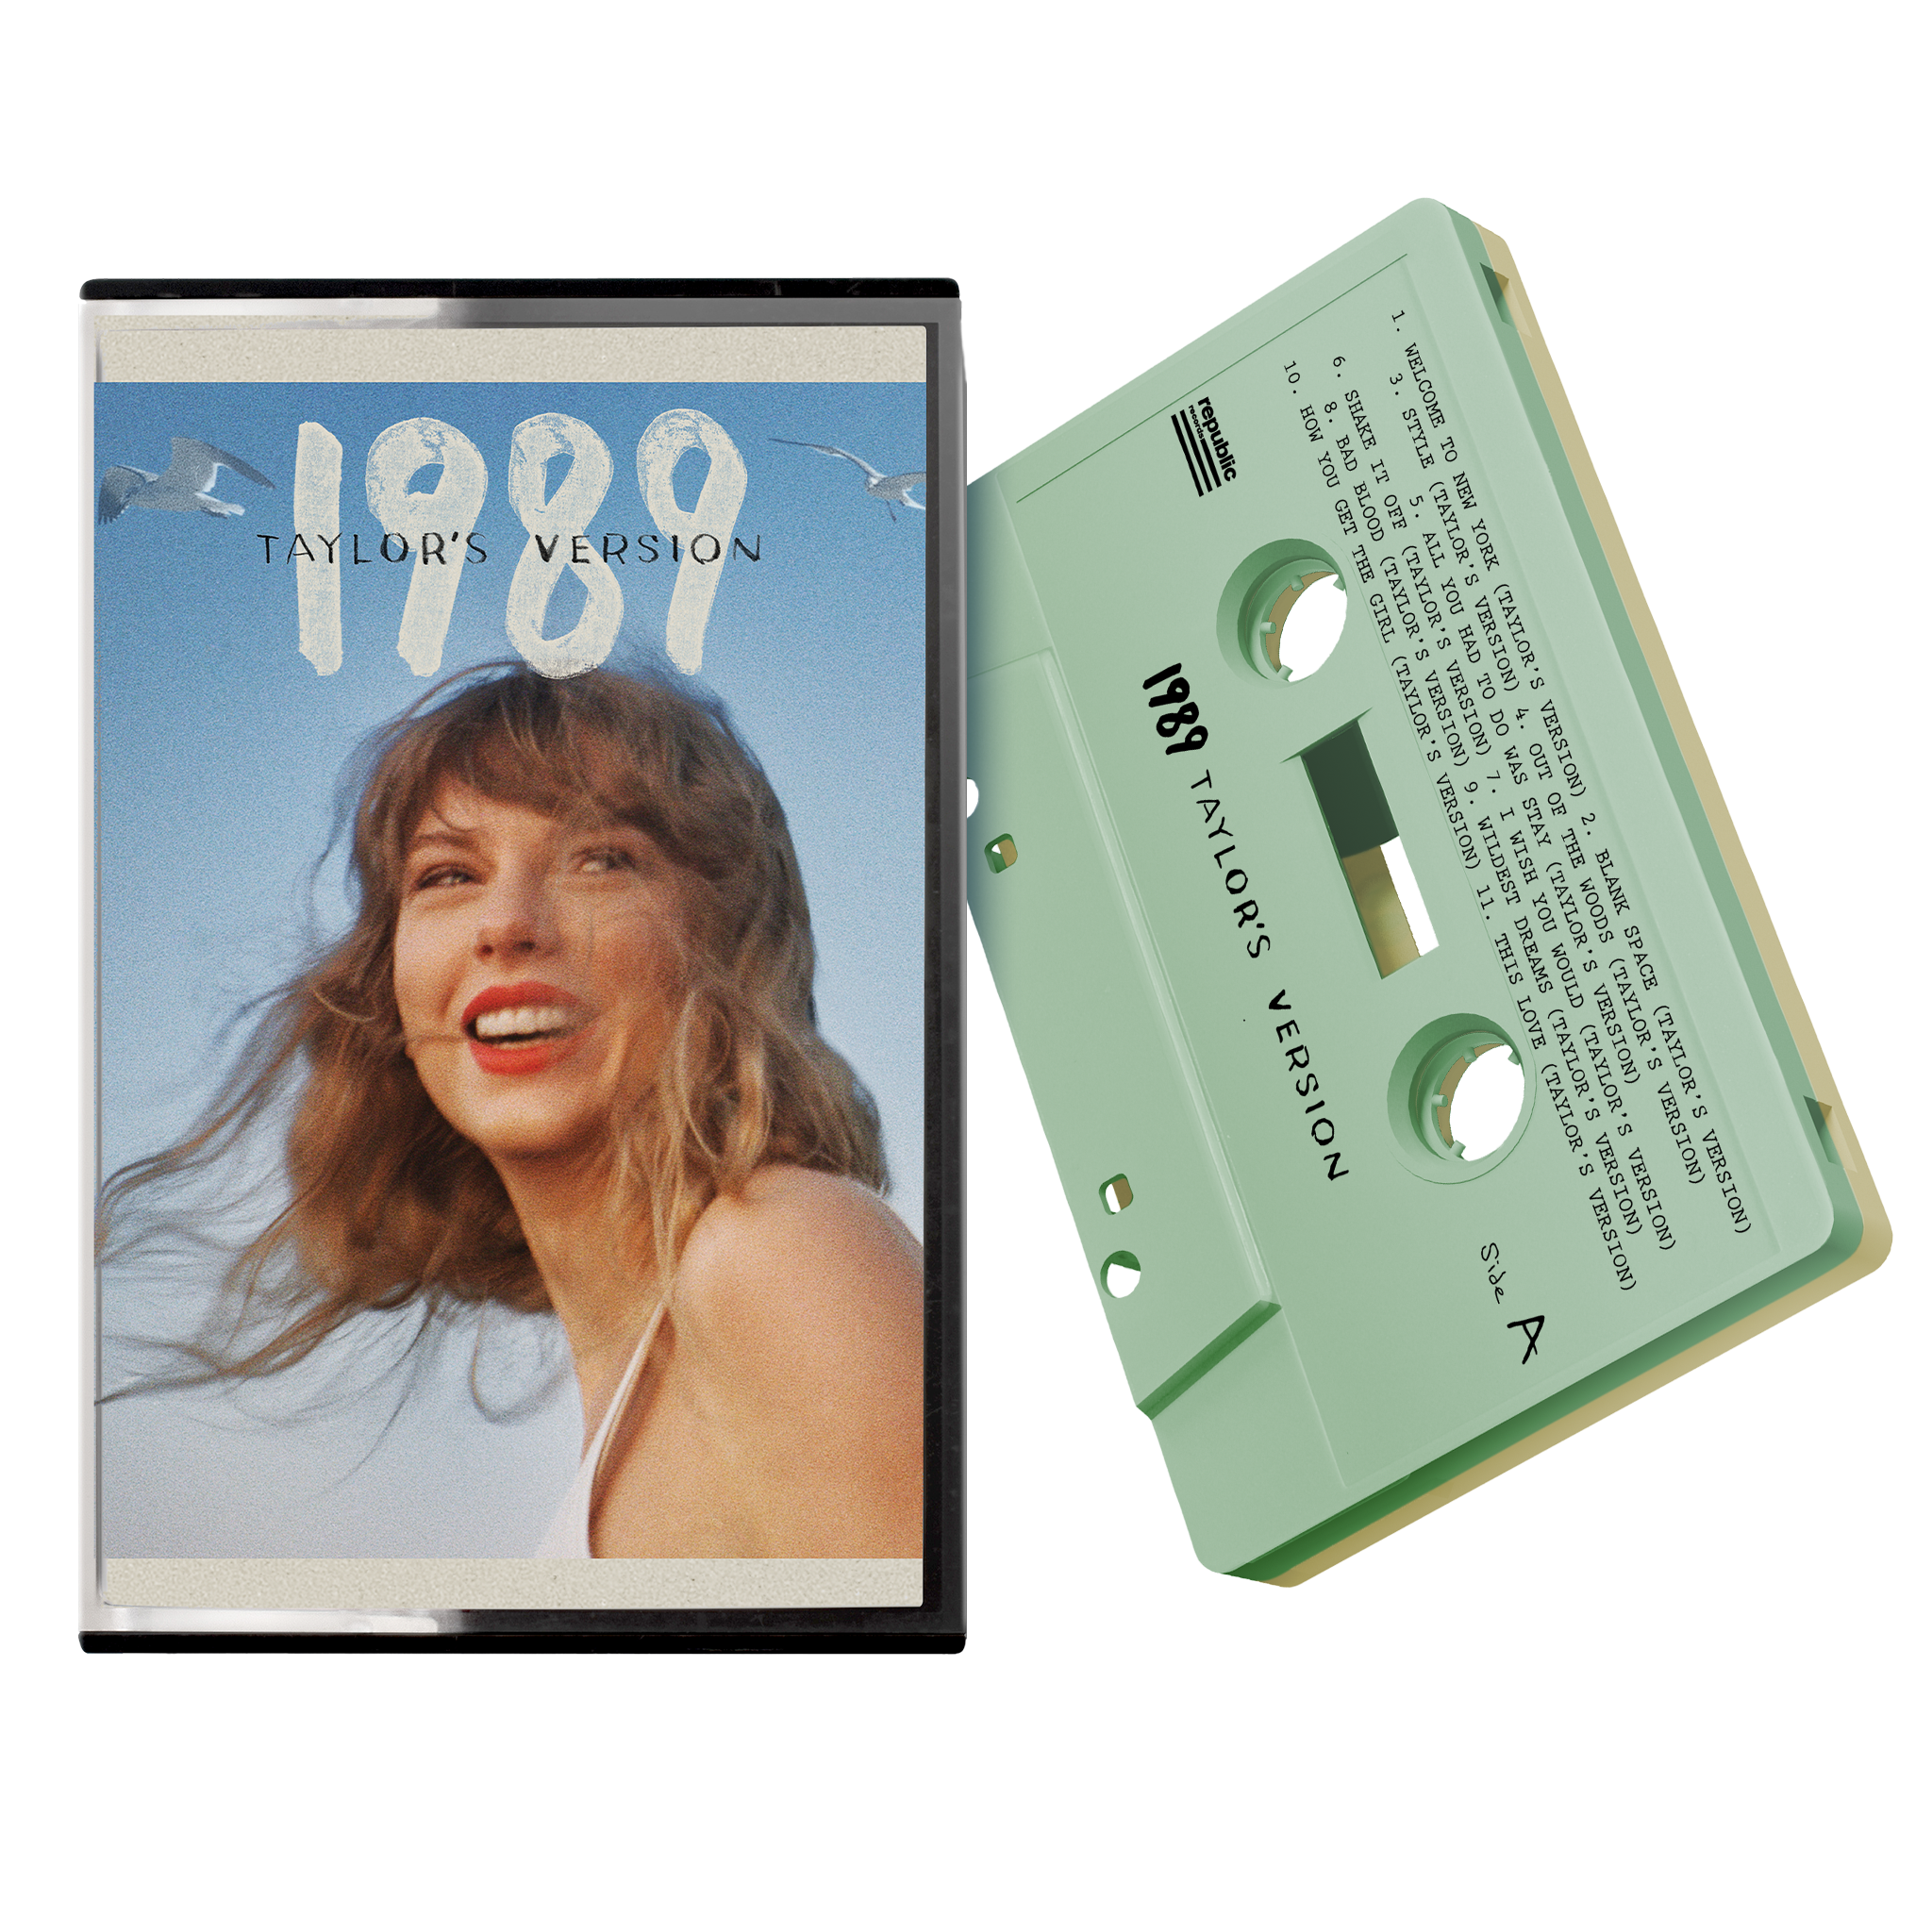 1989 (Taylor's Version) Music - Taylor Swift Official Store